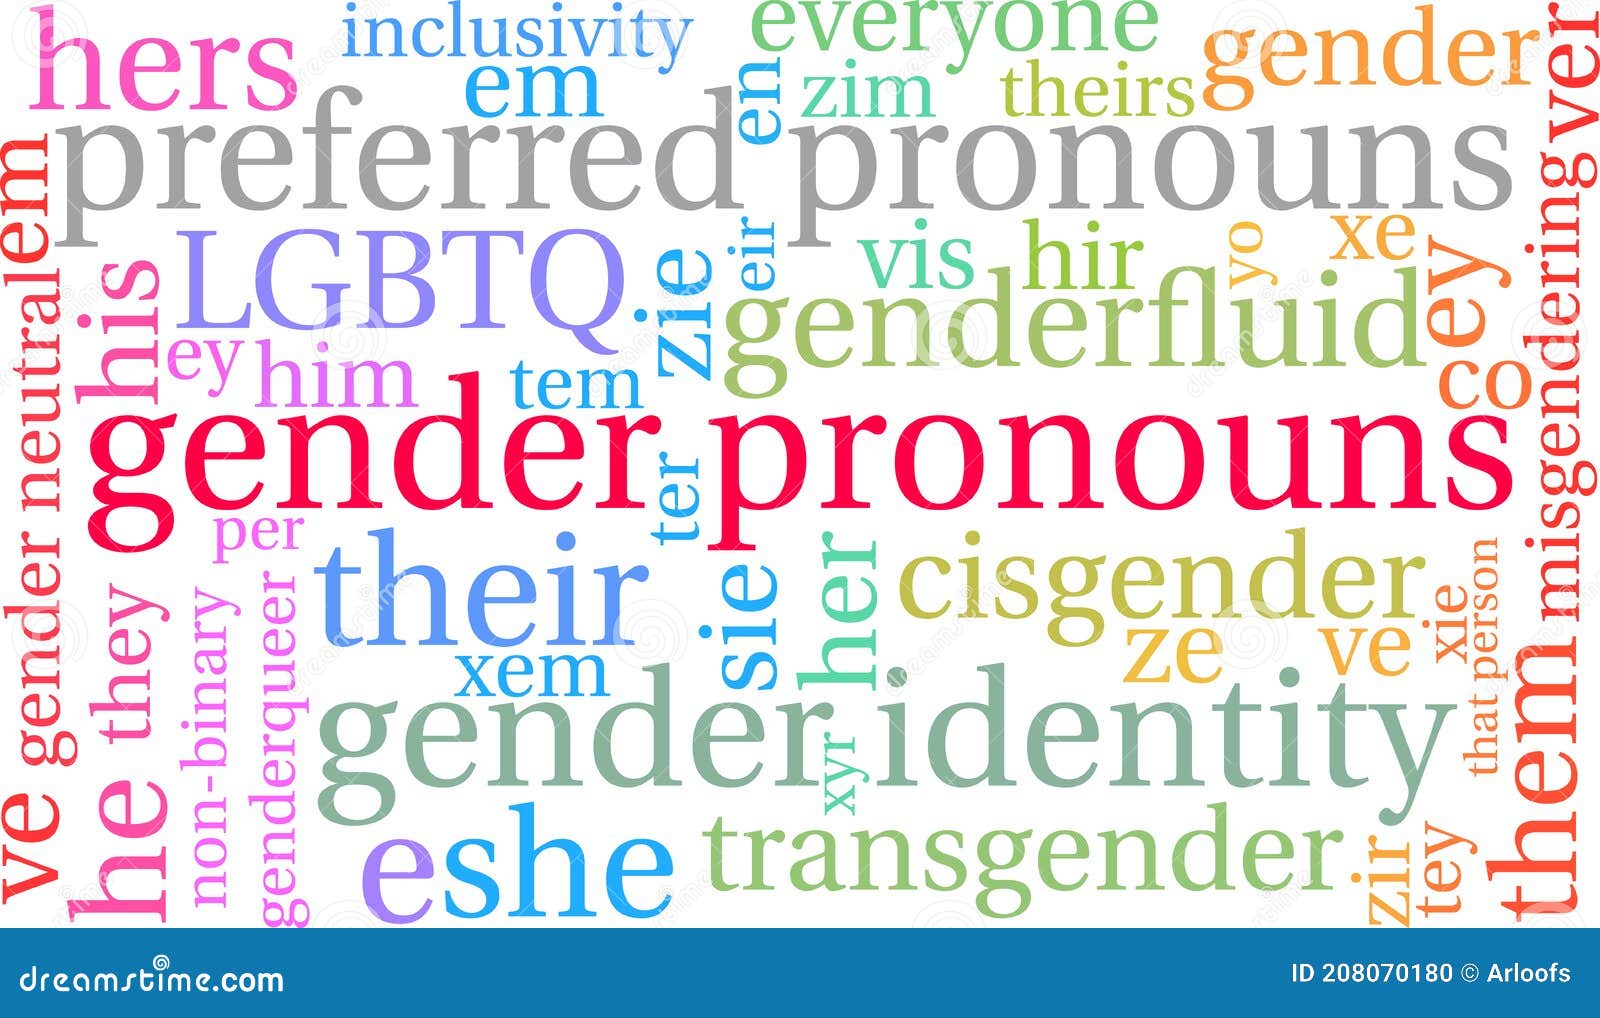 she-he-they-with-gender-pronouns-in-speech-bubbles-stand-on-gender